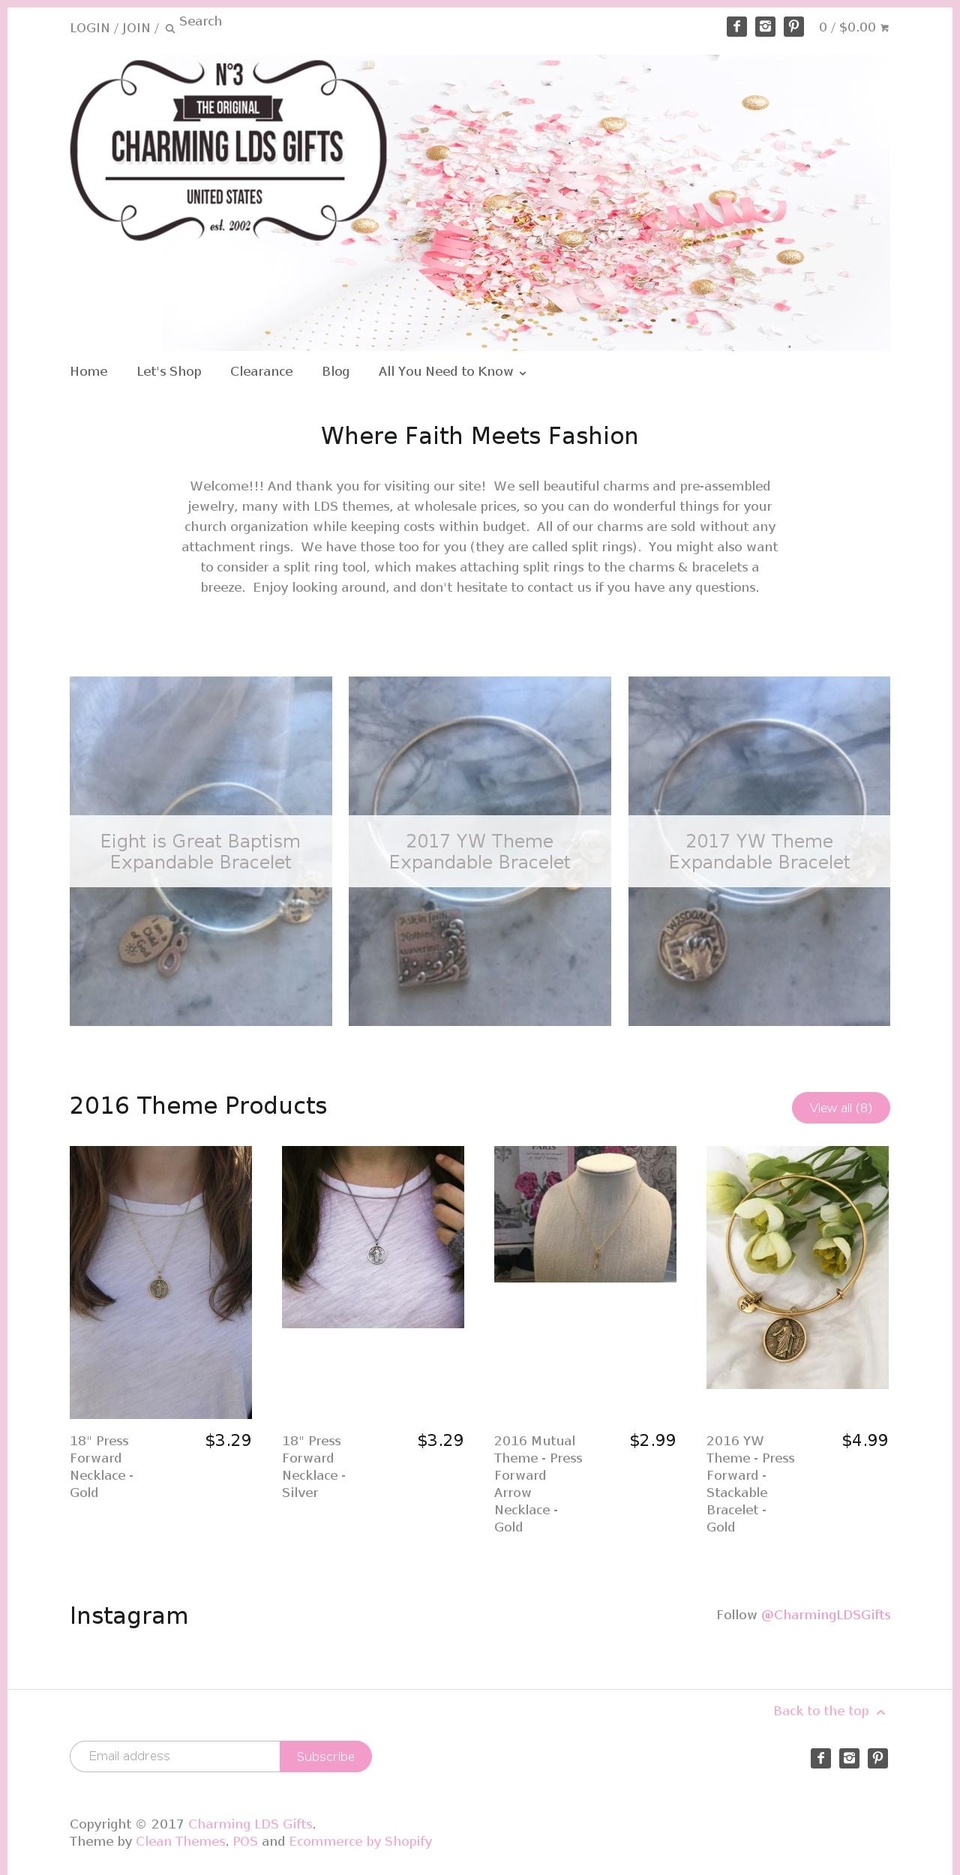 Charming LDS Gifts Shopify theme site example breezykdesign.com